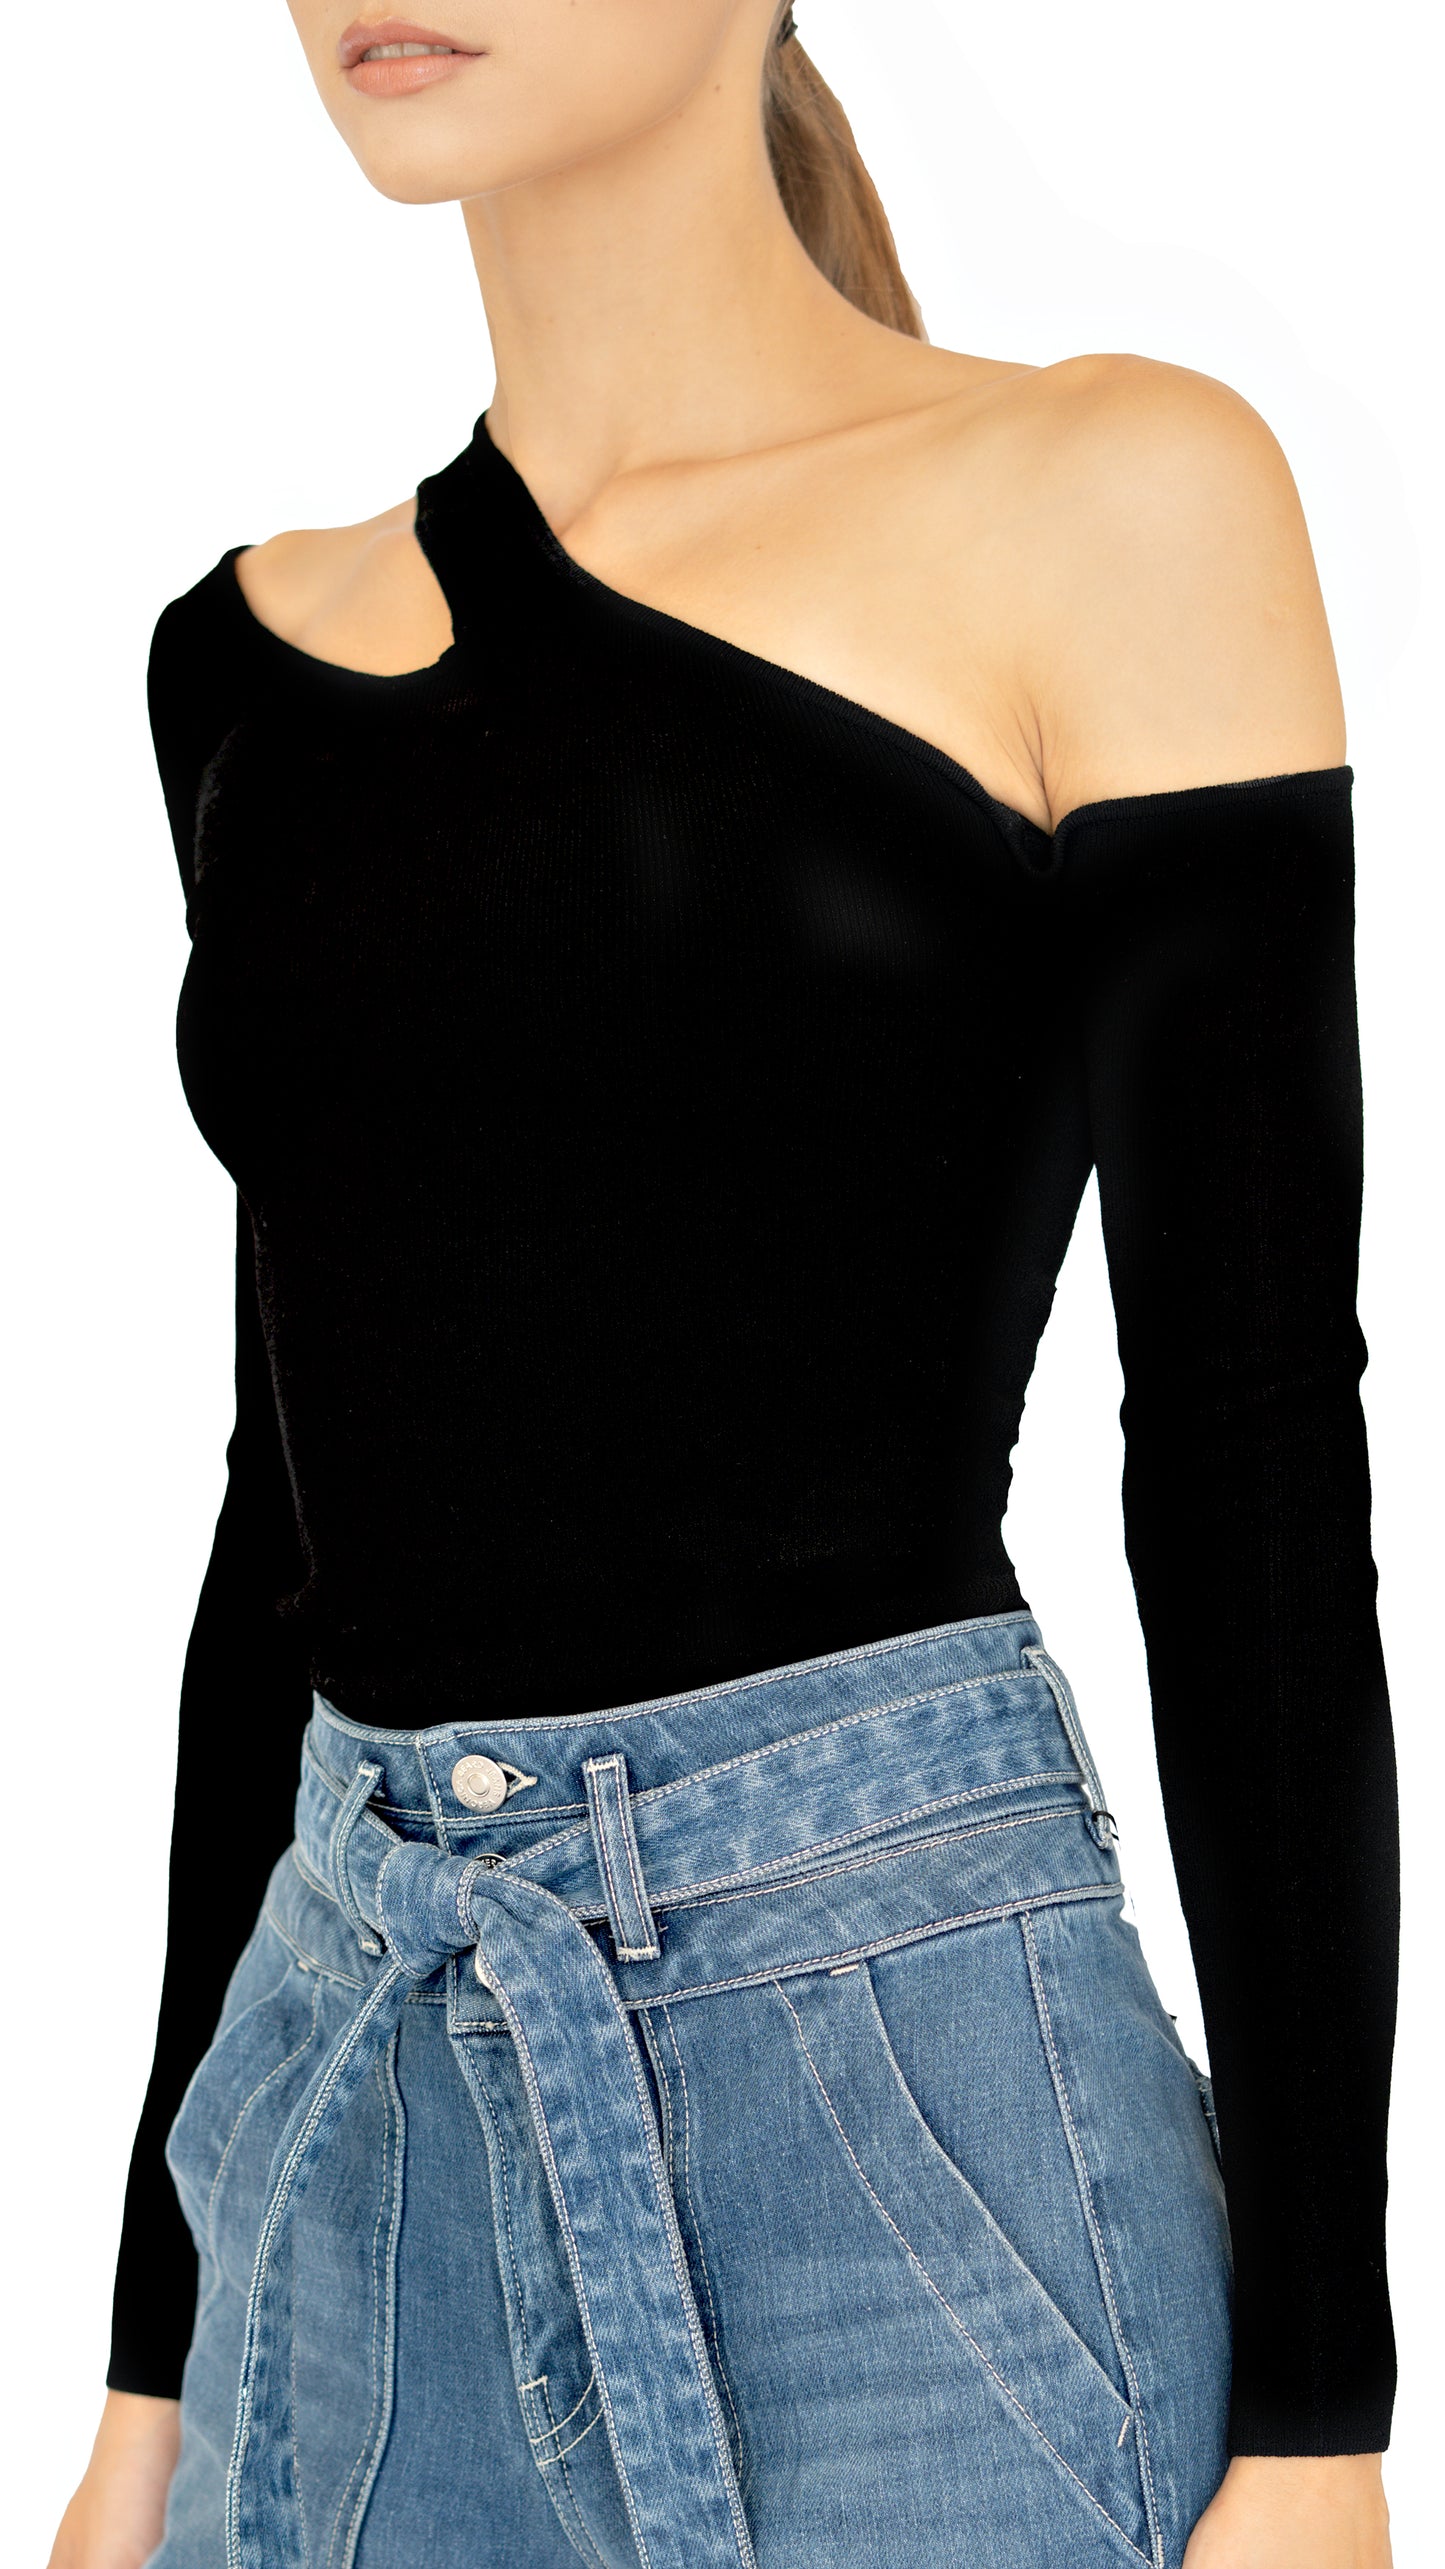 Autumn Cashmere one shoulder long sleeve knit top in black